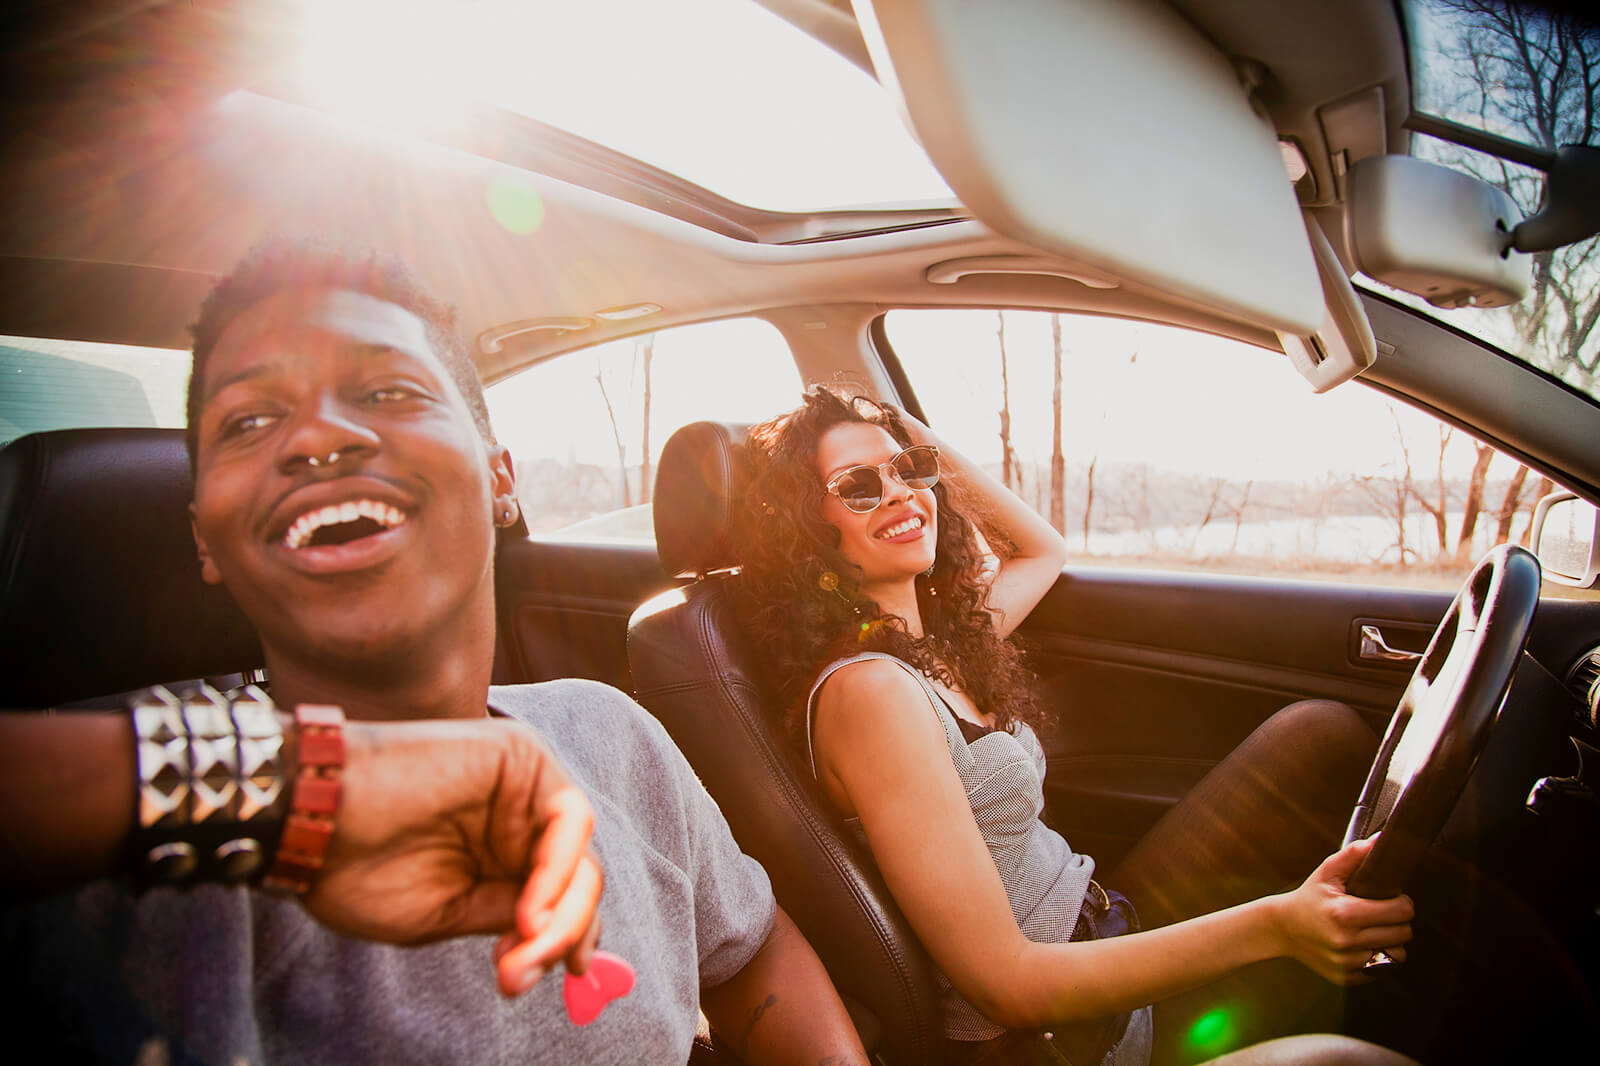 80+ Road Trip Questions for Couples That Will Bring You Closer | LoveToKnow